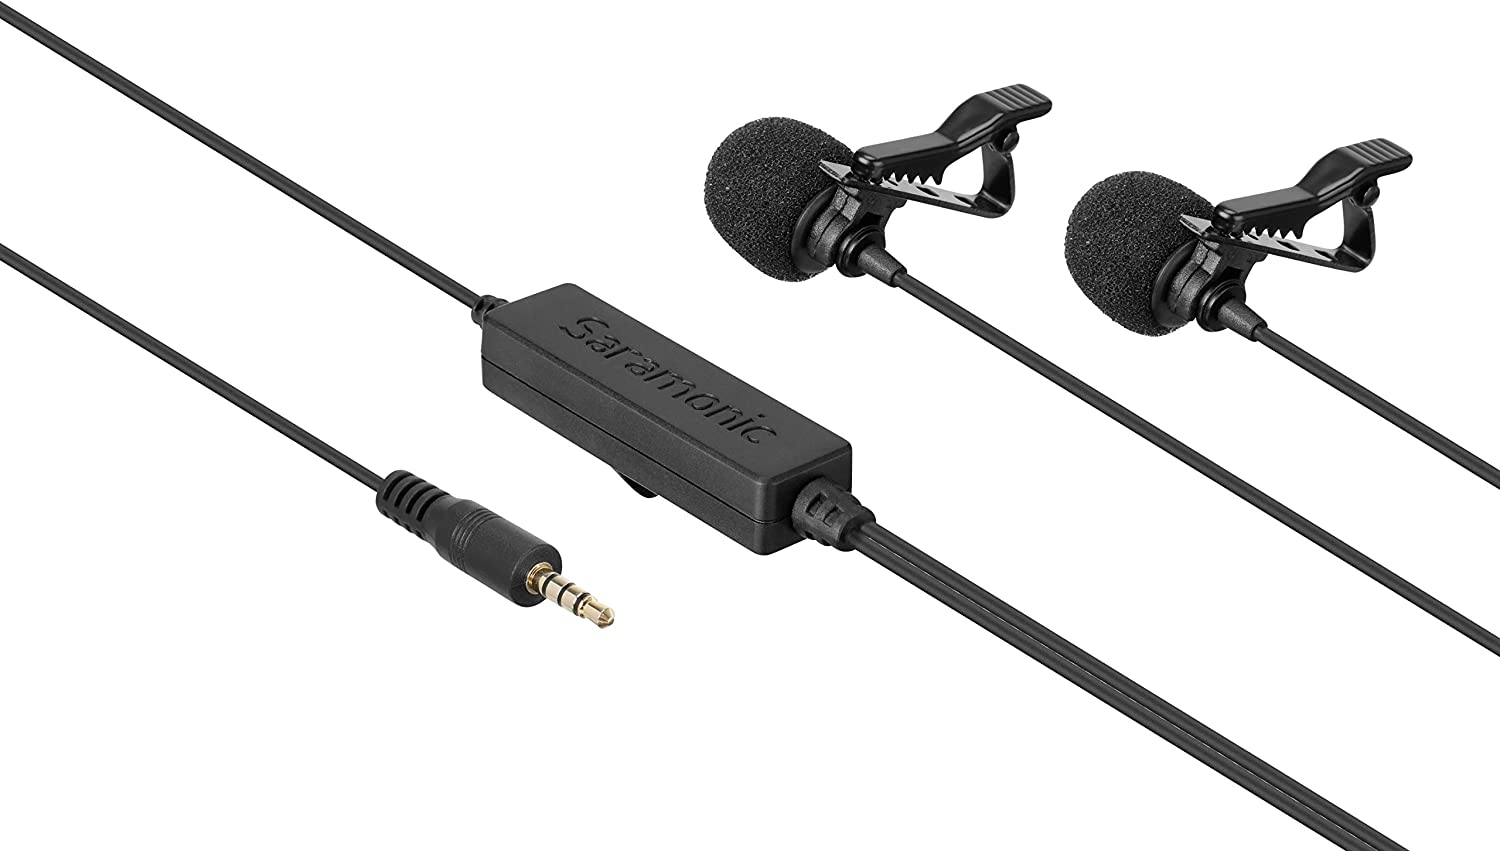 Saramonic LavMicro2M 2-Person Omni Lavalier Mic with 3.5mm TRS/TRRS Output for Cameras, Mobile Devices & More